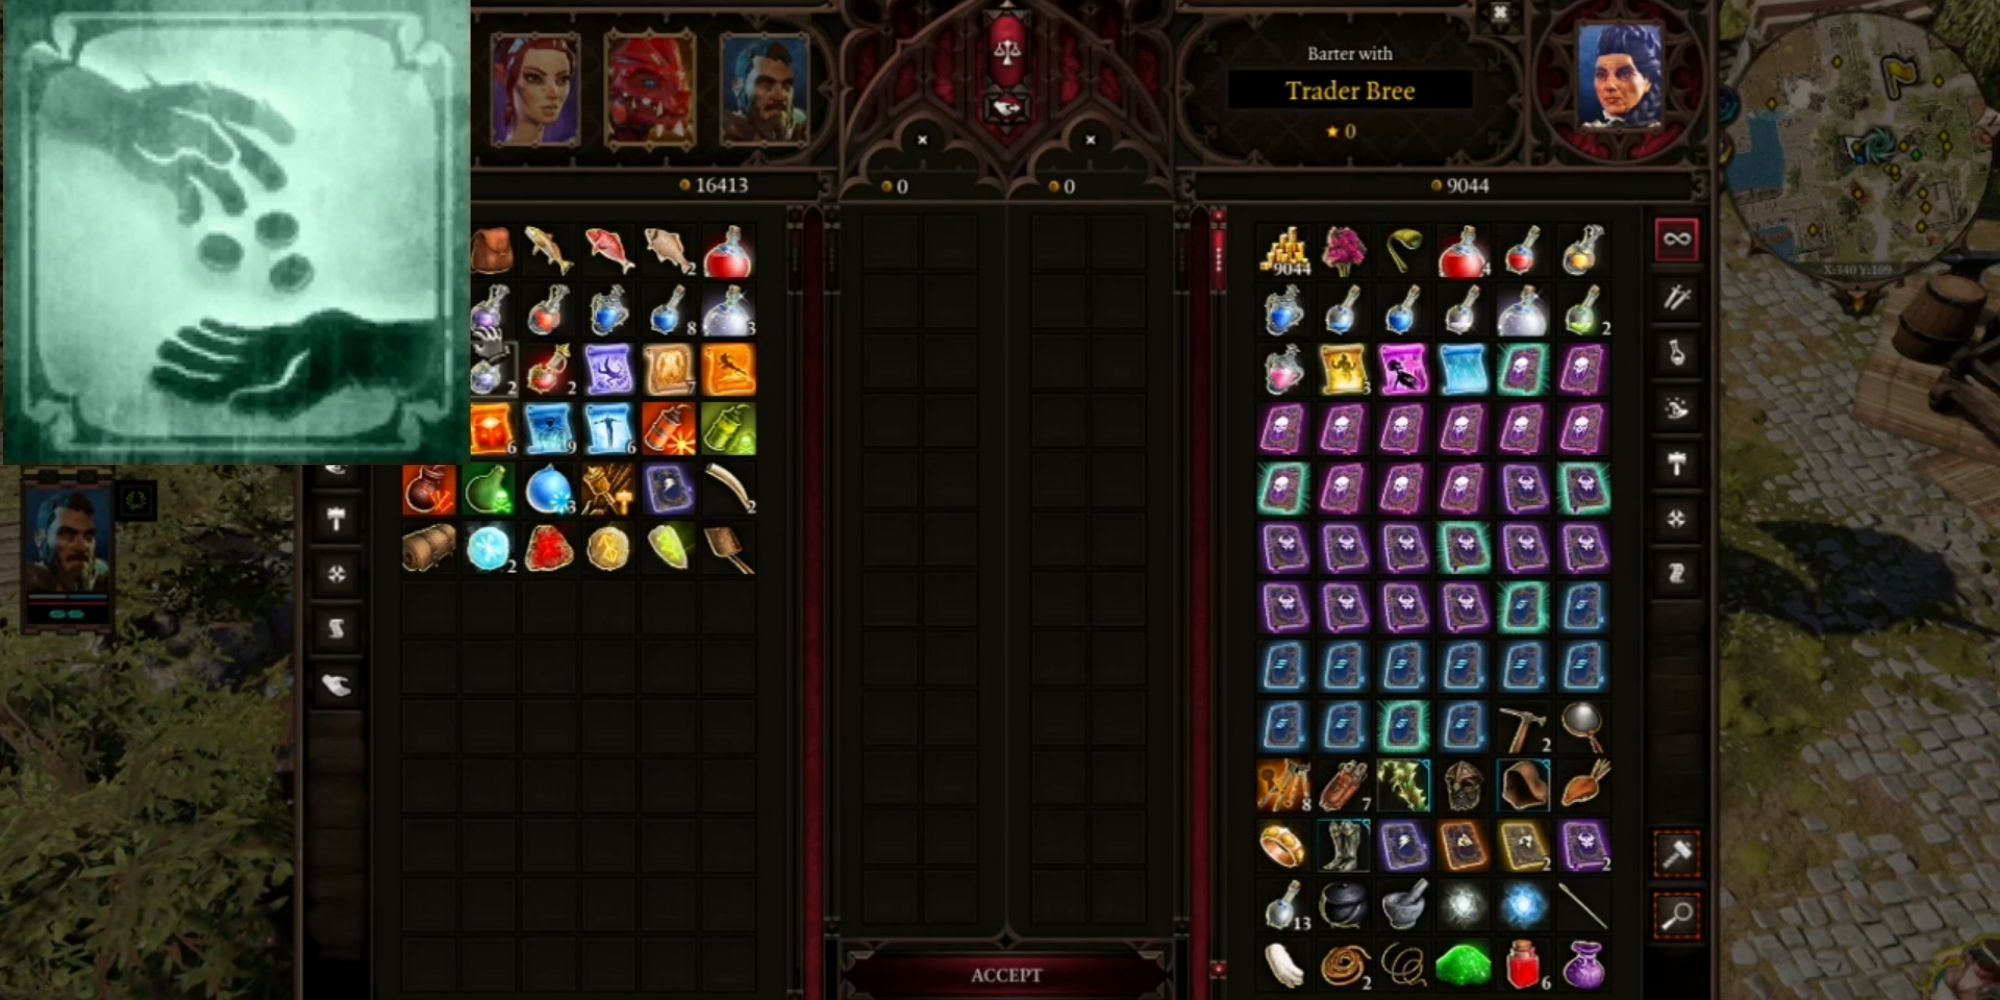 Divinity Original Sin 2 - Bartering Icon and Barter screen with Trader Bree